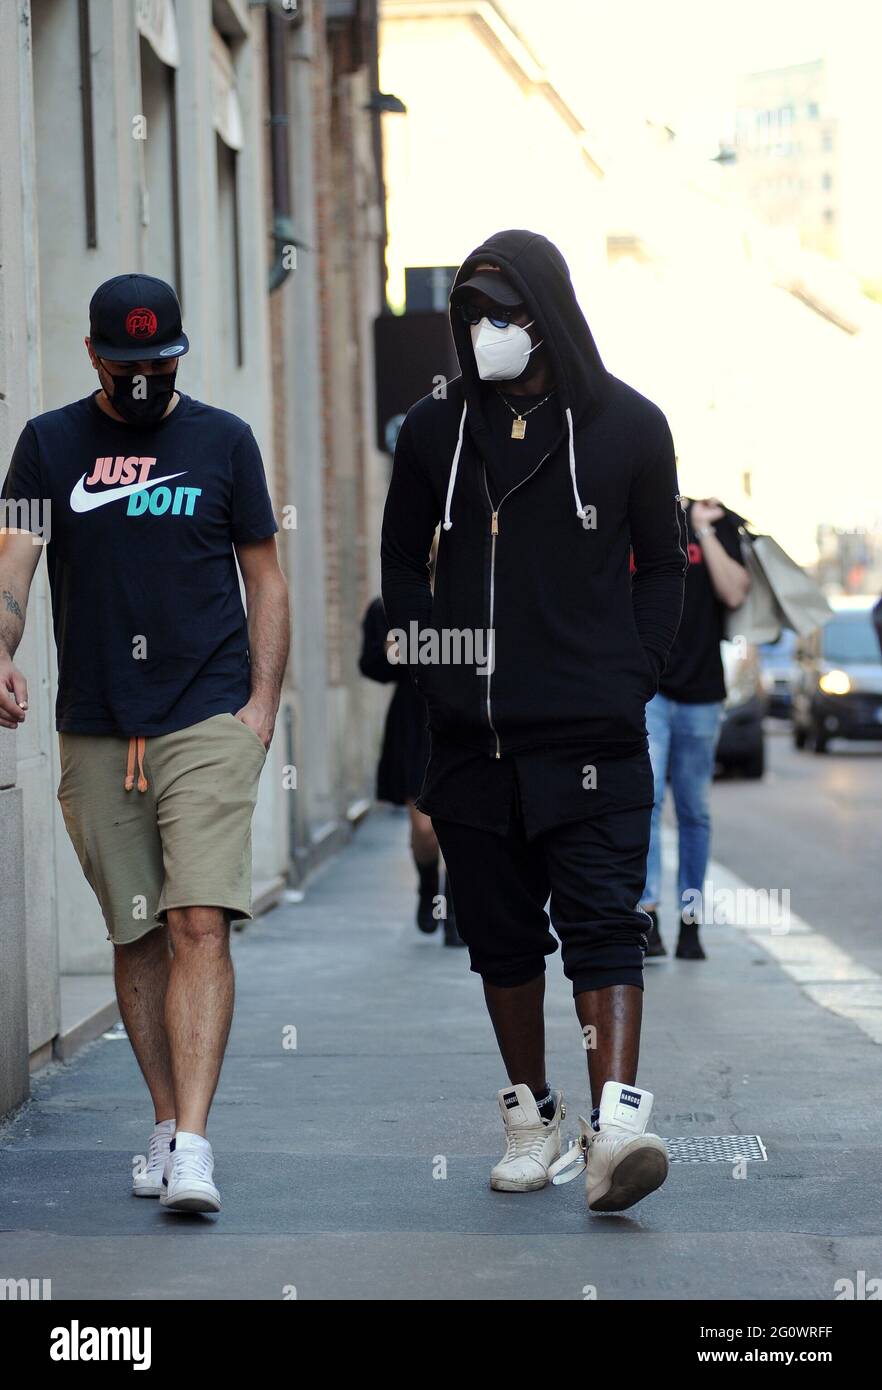 Milan, Italy. June 3 2021: Milan, Mario Balotelli shopping in disguise in  the center Trying to disguise himself as much as possible so as not to be  recognized, MARIO BALOTELLI arrives in